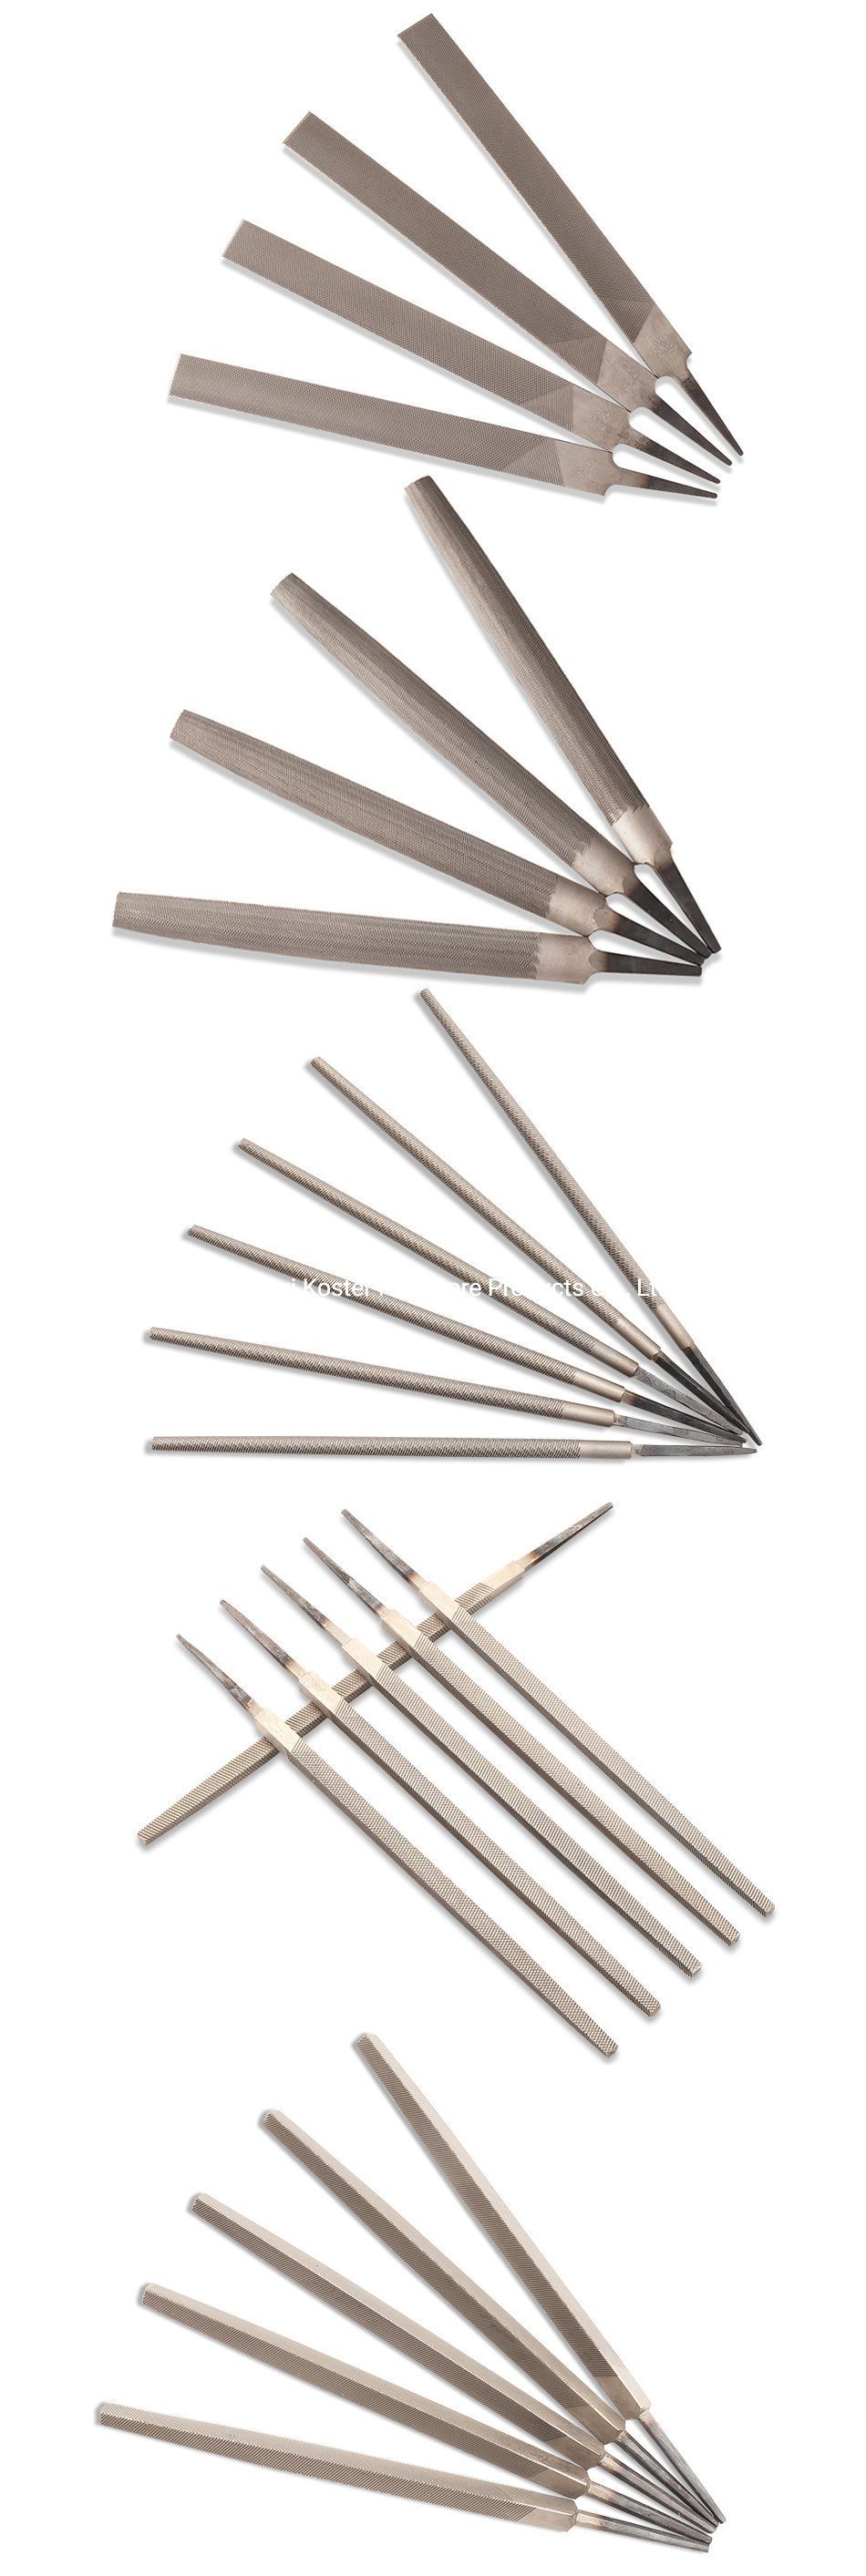 Flat Type Steel Files T10 T12 Size 6 8 10 13 Inch Bastard Second Smooth Single Double Cut Tooth Engineer&prime; S Hand Tools